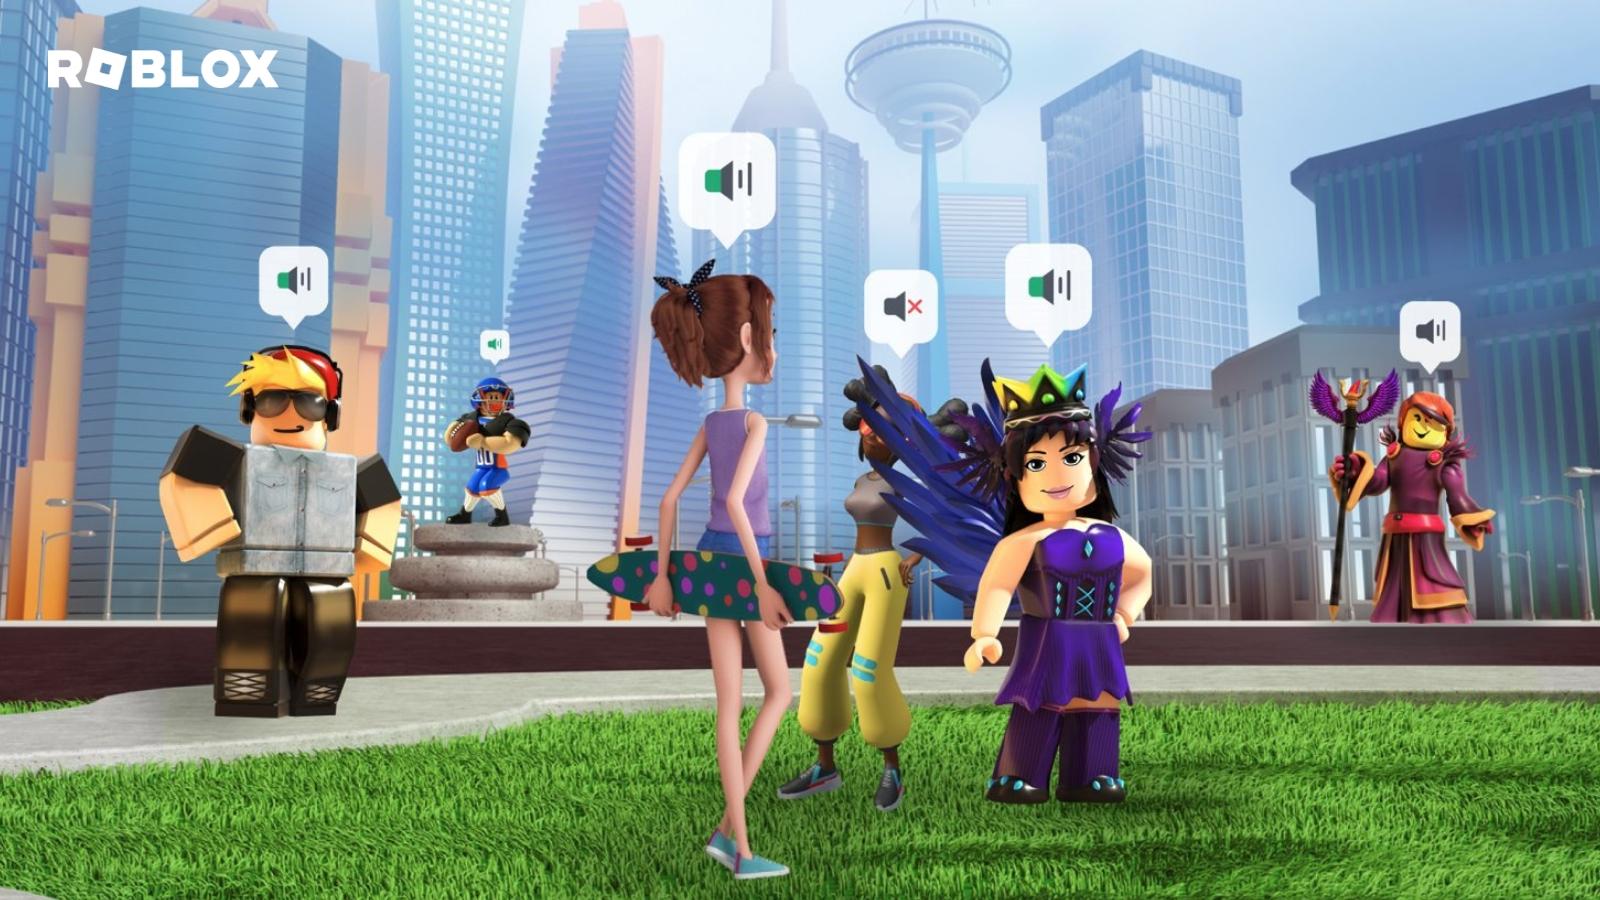 Roblox will soon let players make calls from inside the game